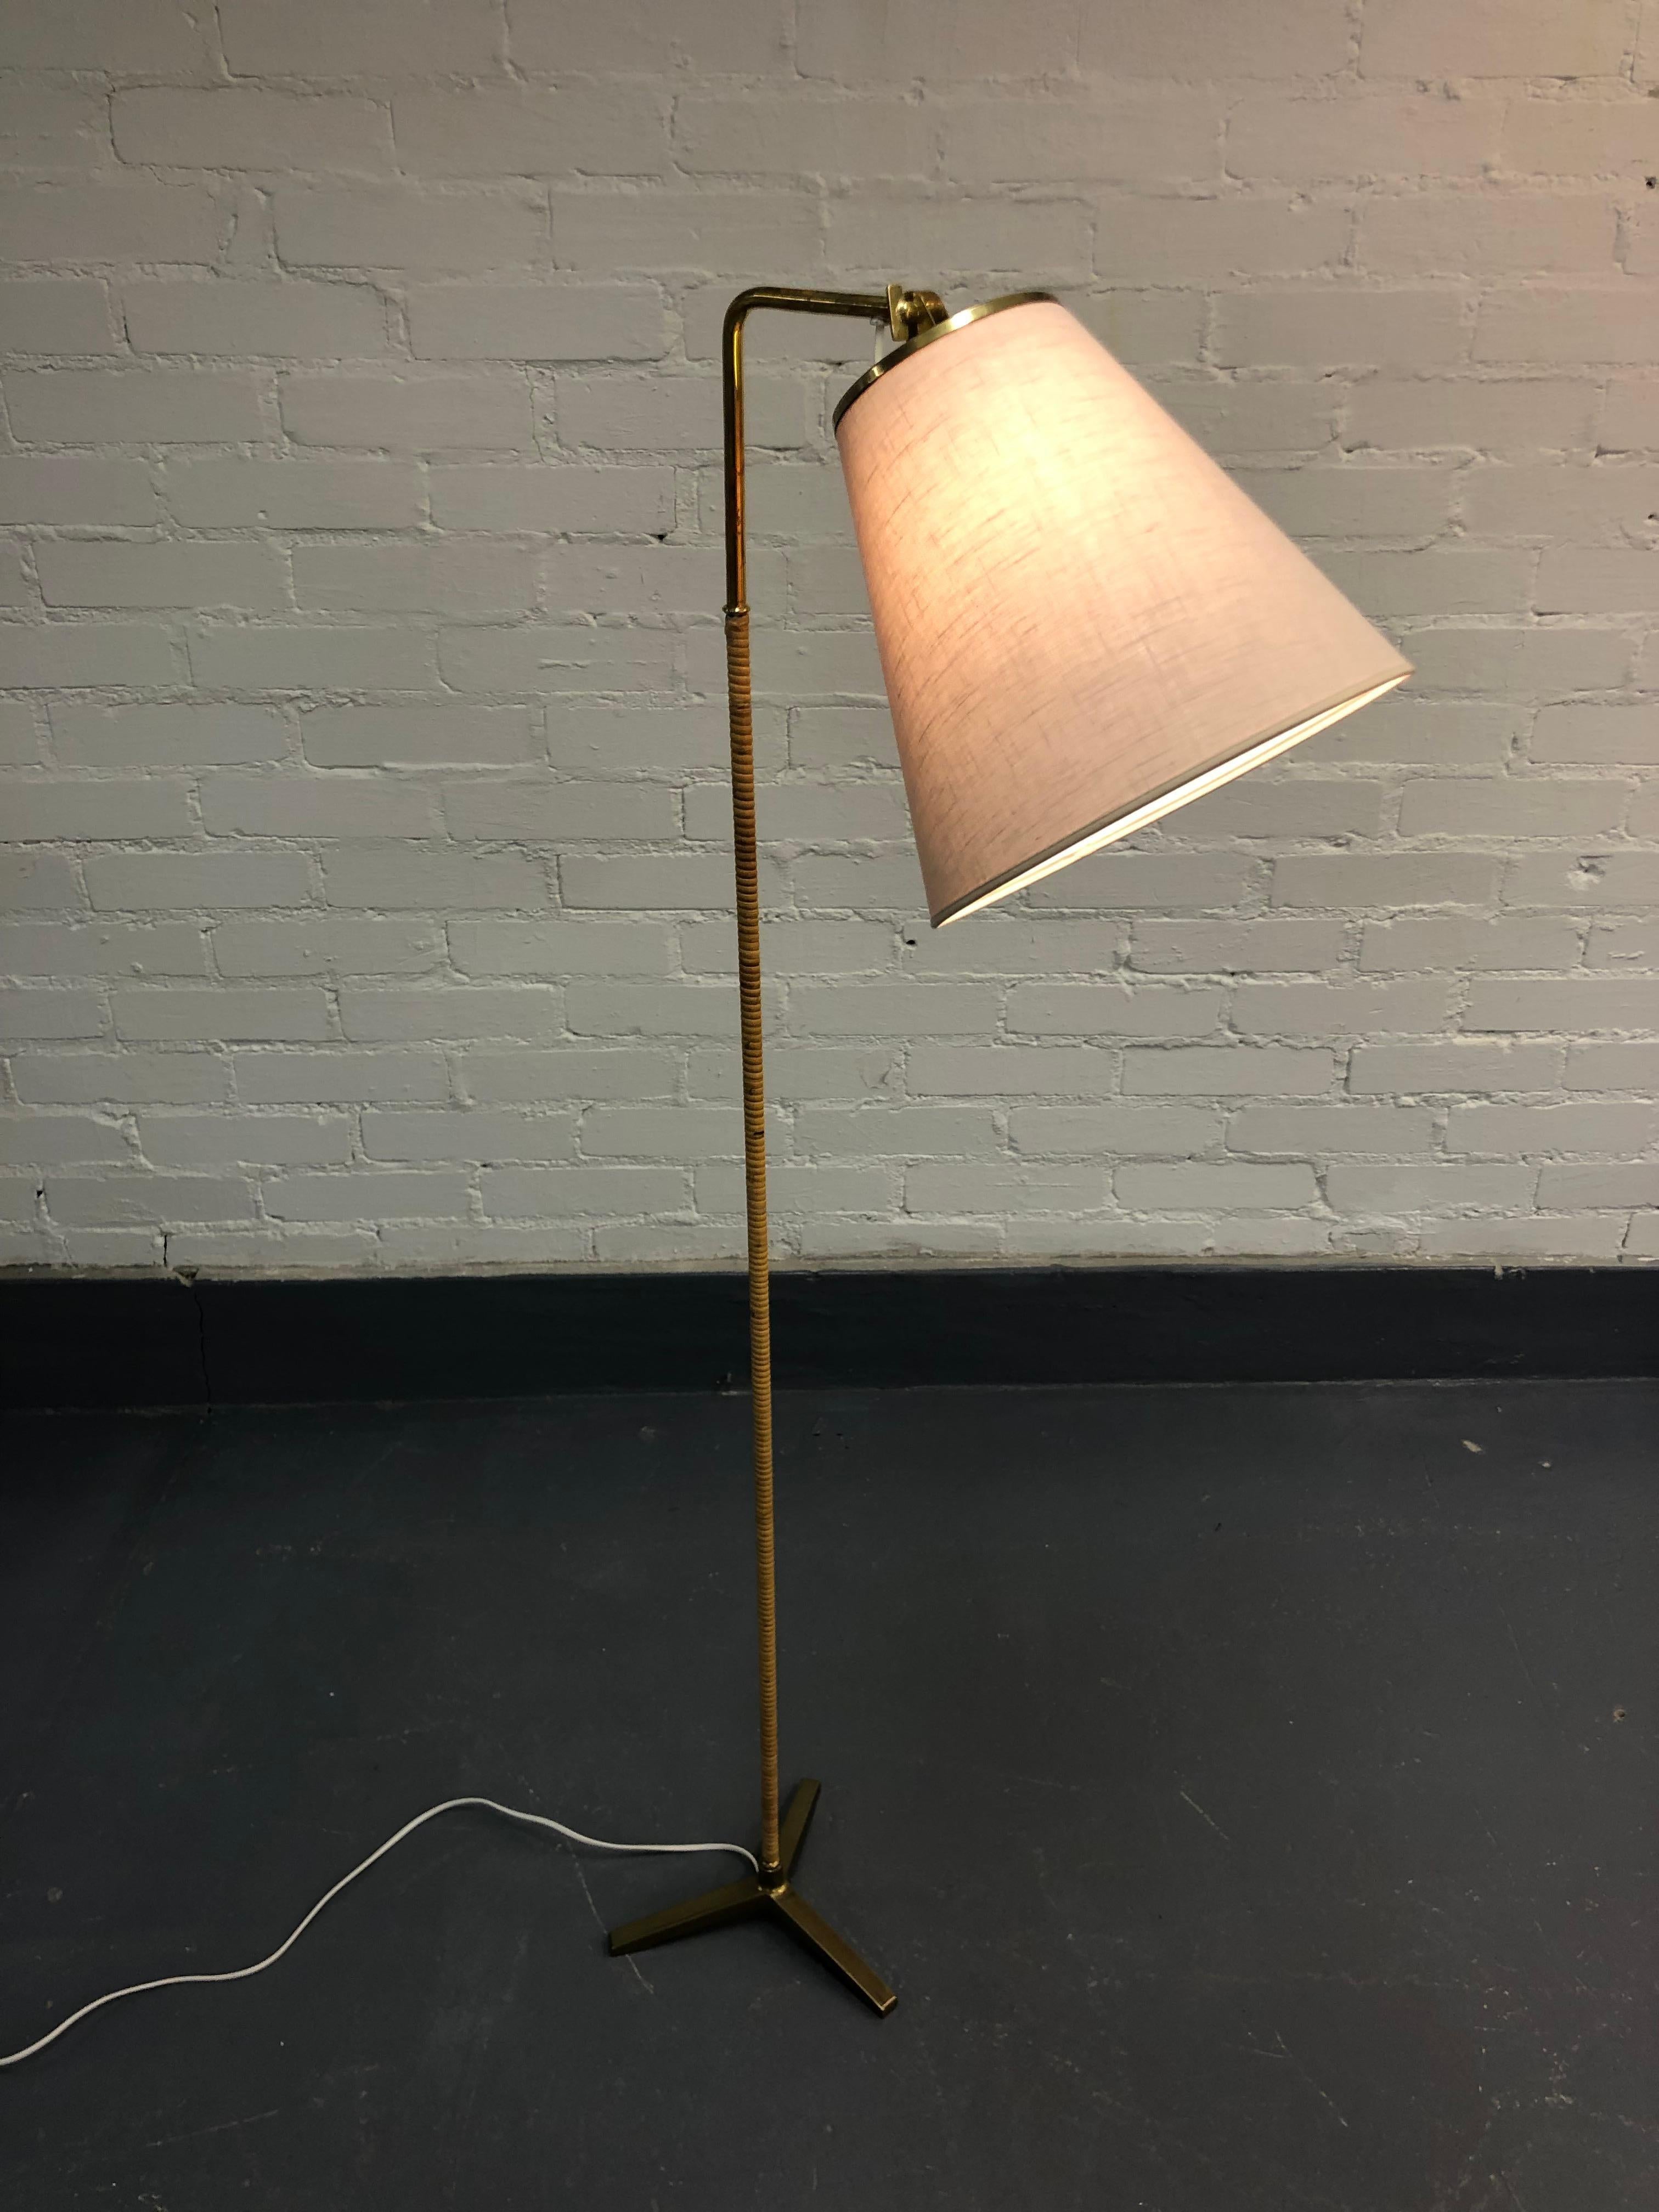 A very rare, but one of the best and most iconic floor lamps from the golden era of Paavo Tynell. This model 9631 lamp is in great original condition straight from the 1950s, apart from the wires and shade which have been changed. Along with the